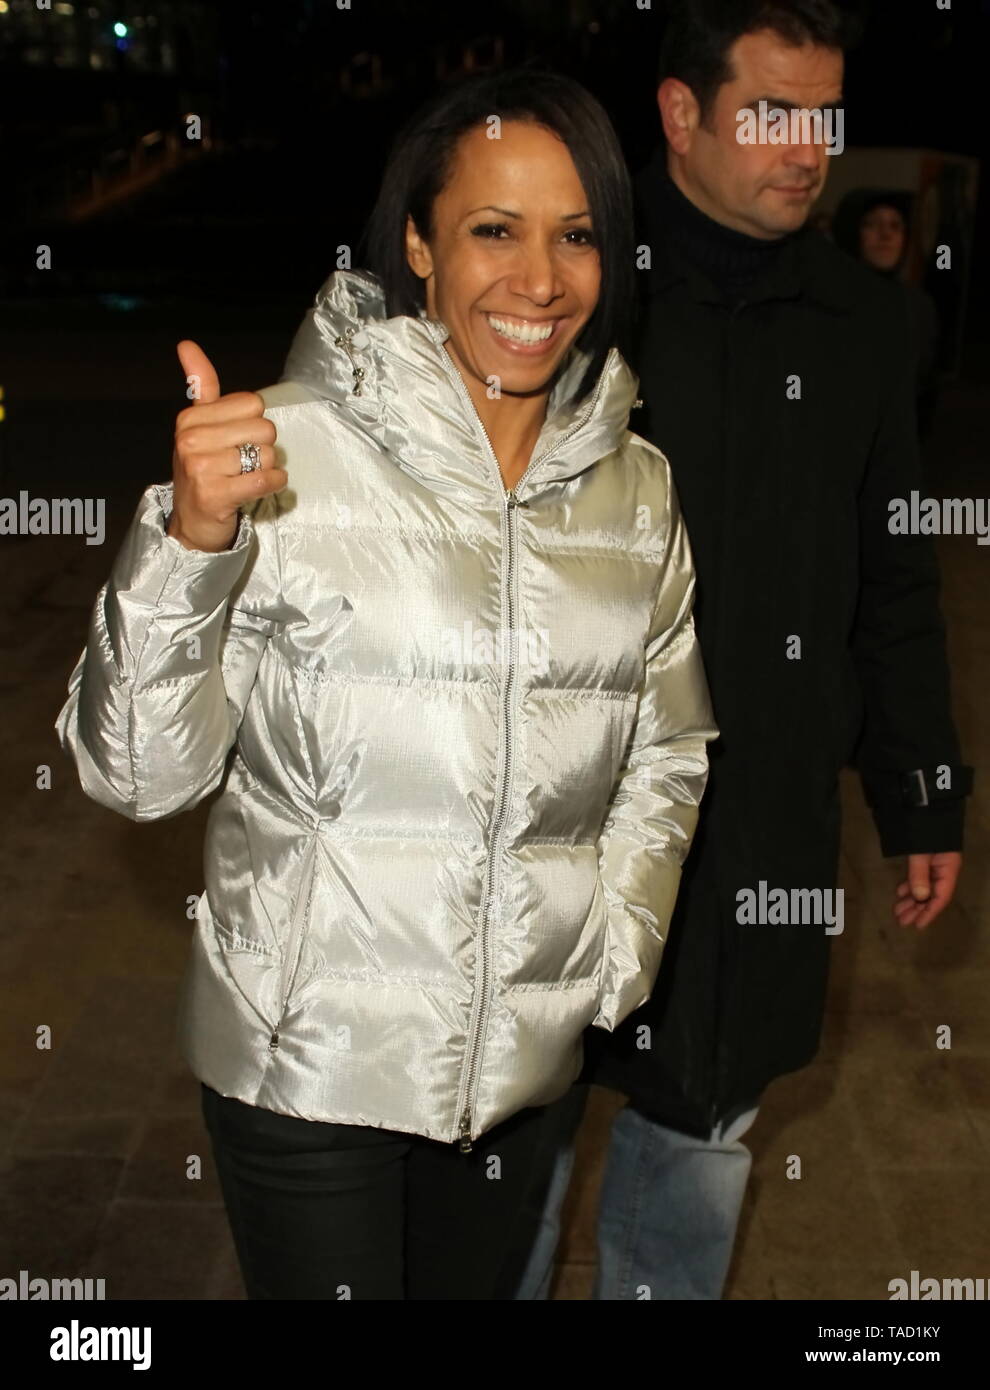 Dame Kelly Holmes spotted in Liverpool credit Ian Fairbrother/Alamy Stock Photos Stock Photo